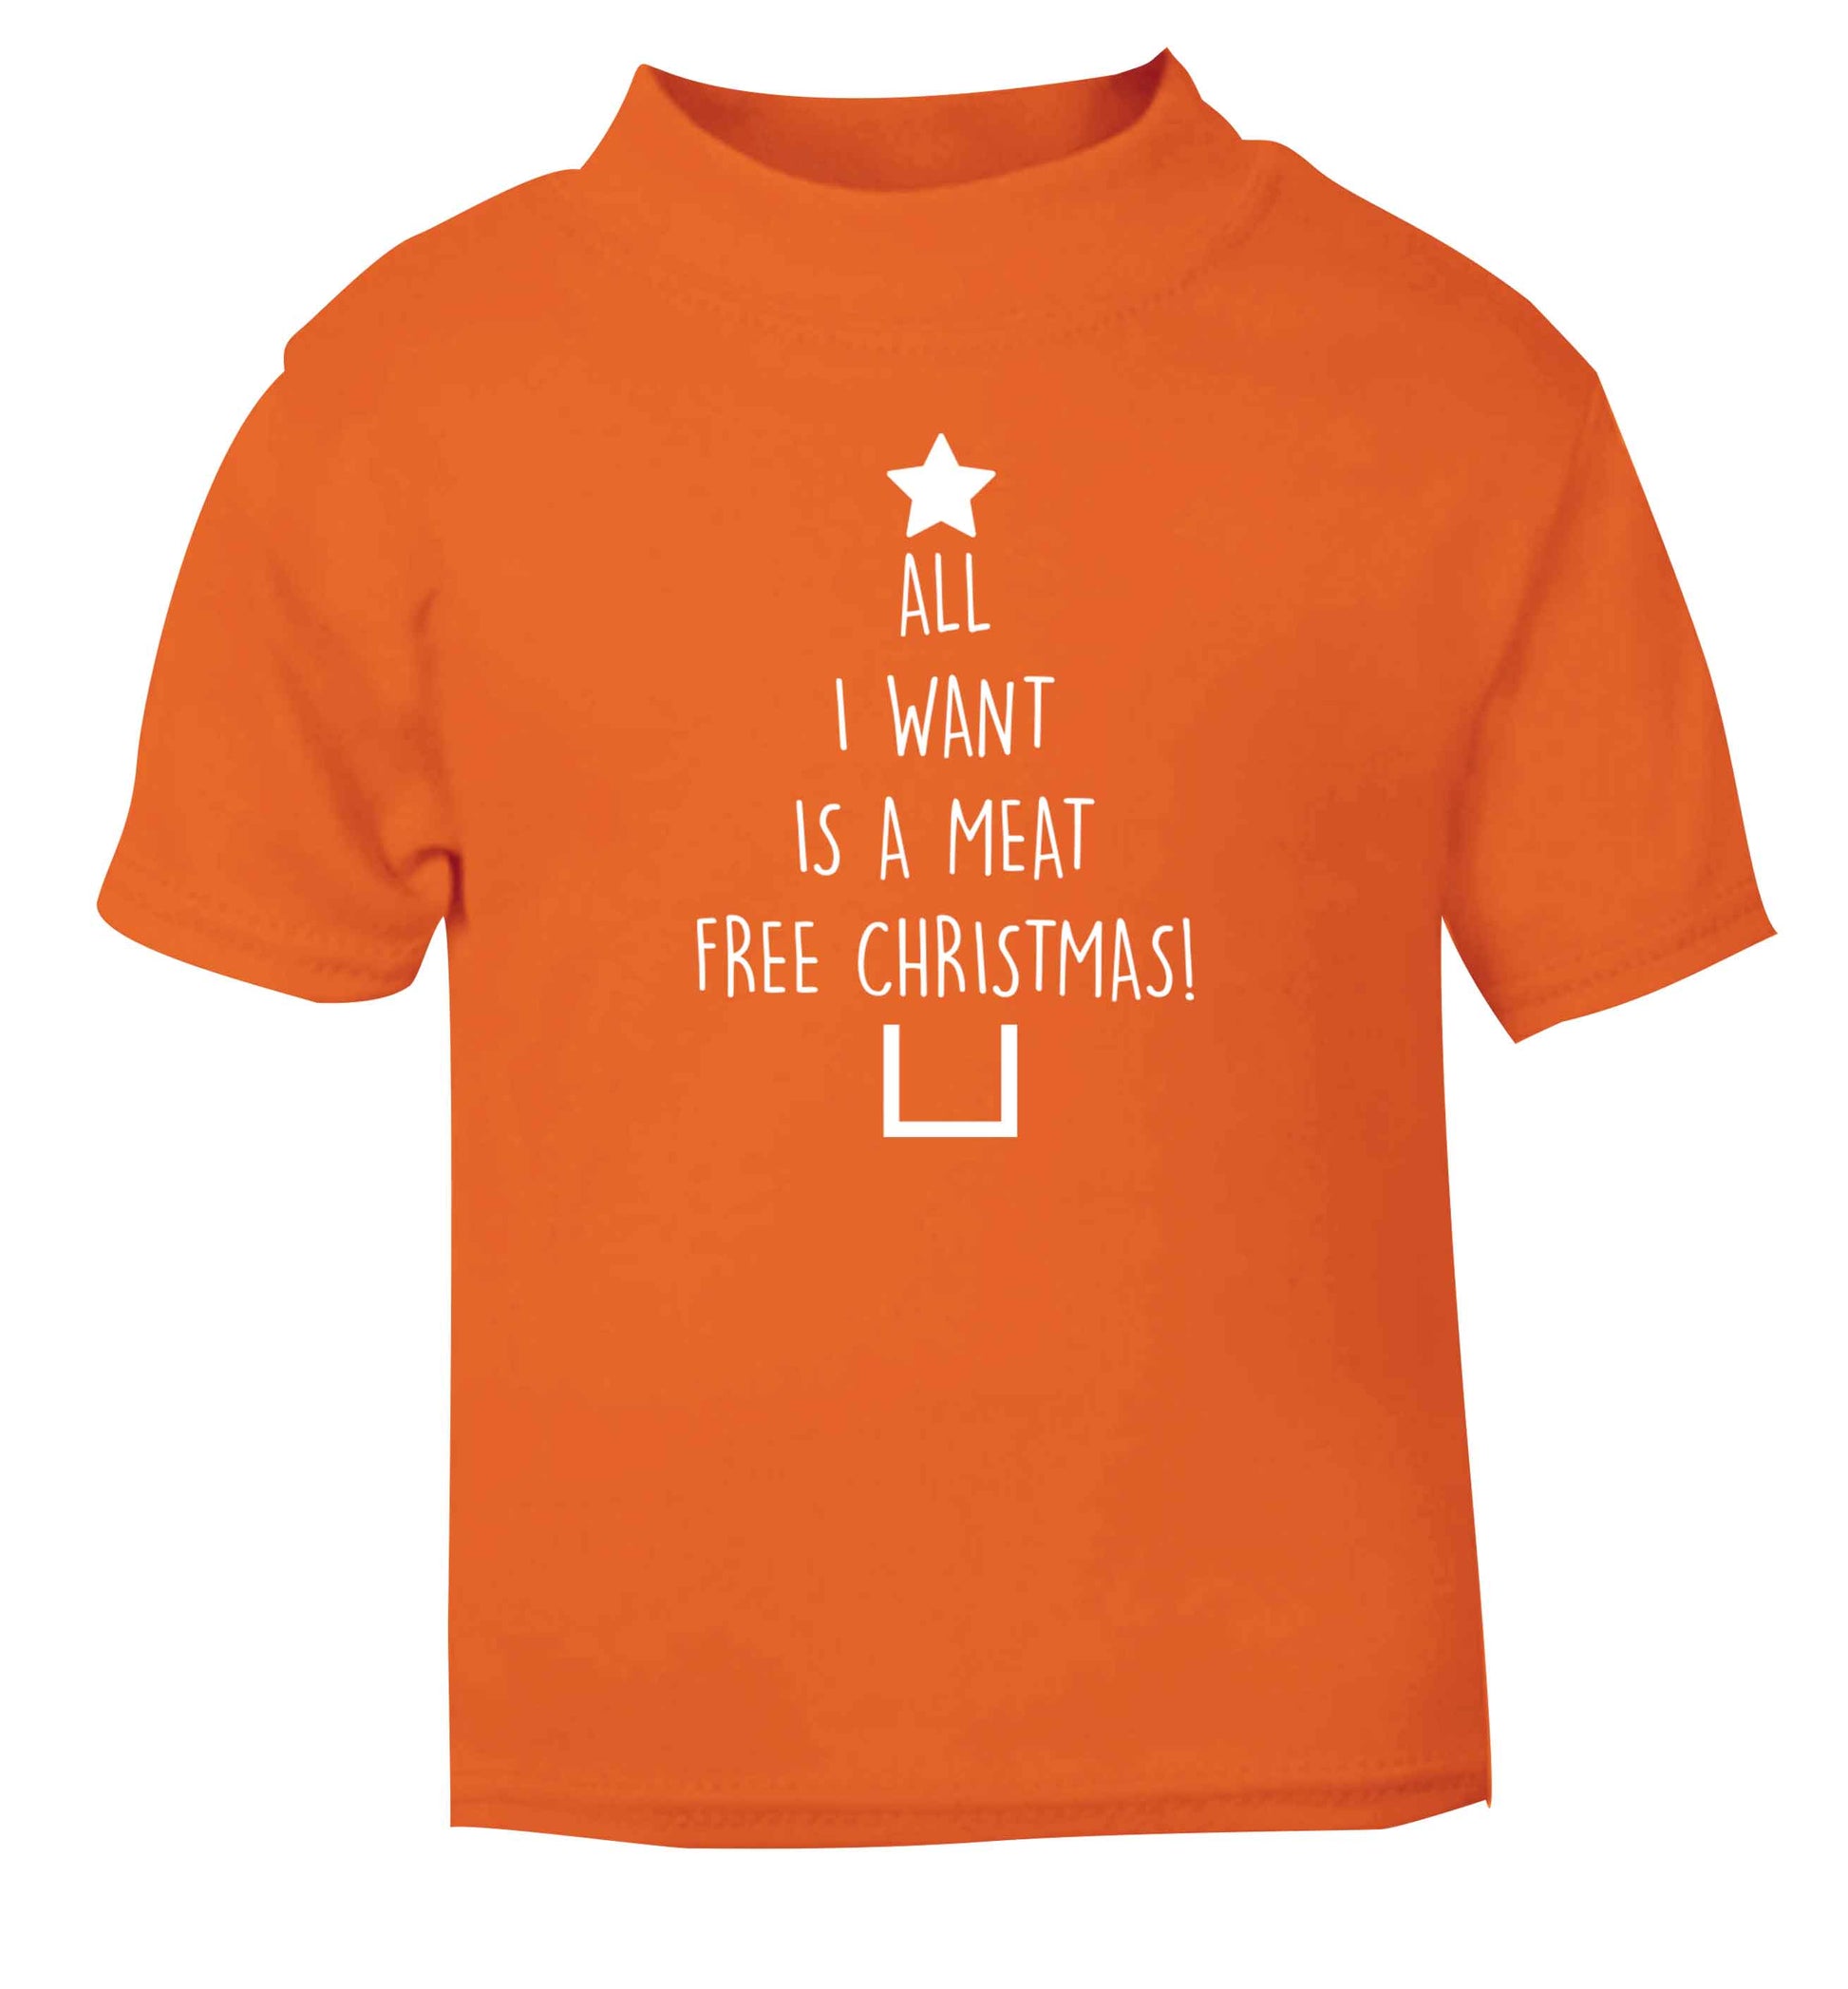 All I want is a meat free Christmas orange Baby Toddler Tshirt 2 Years